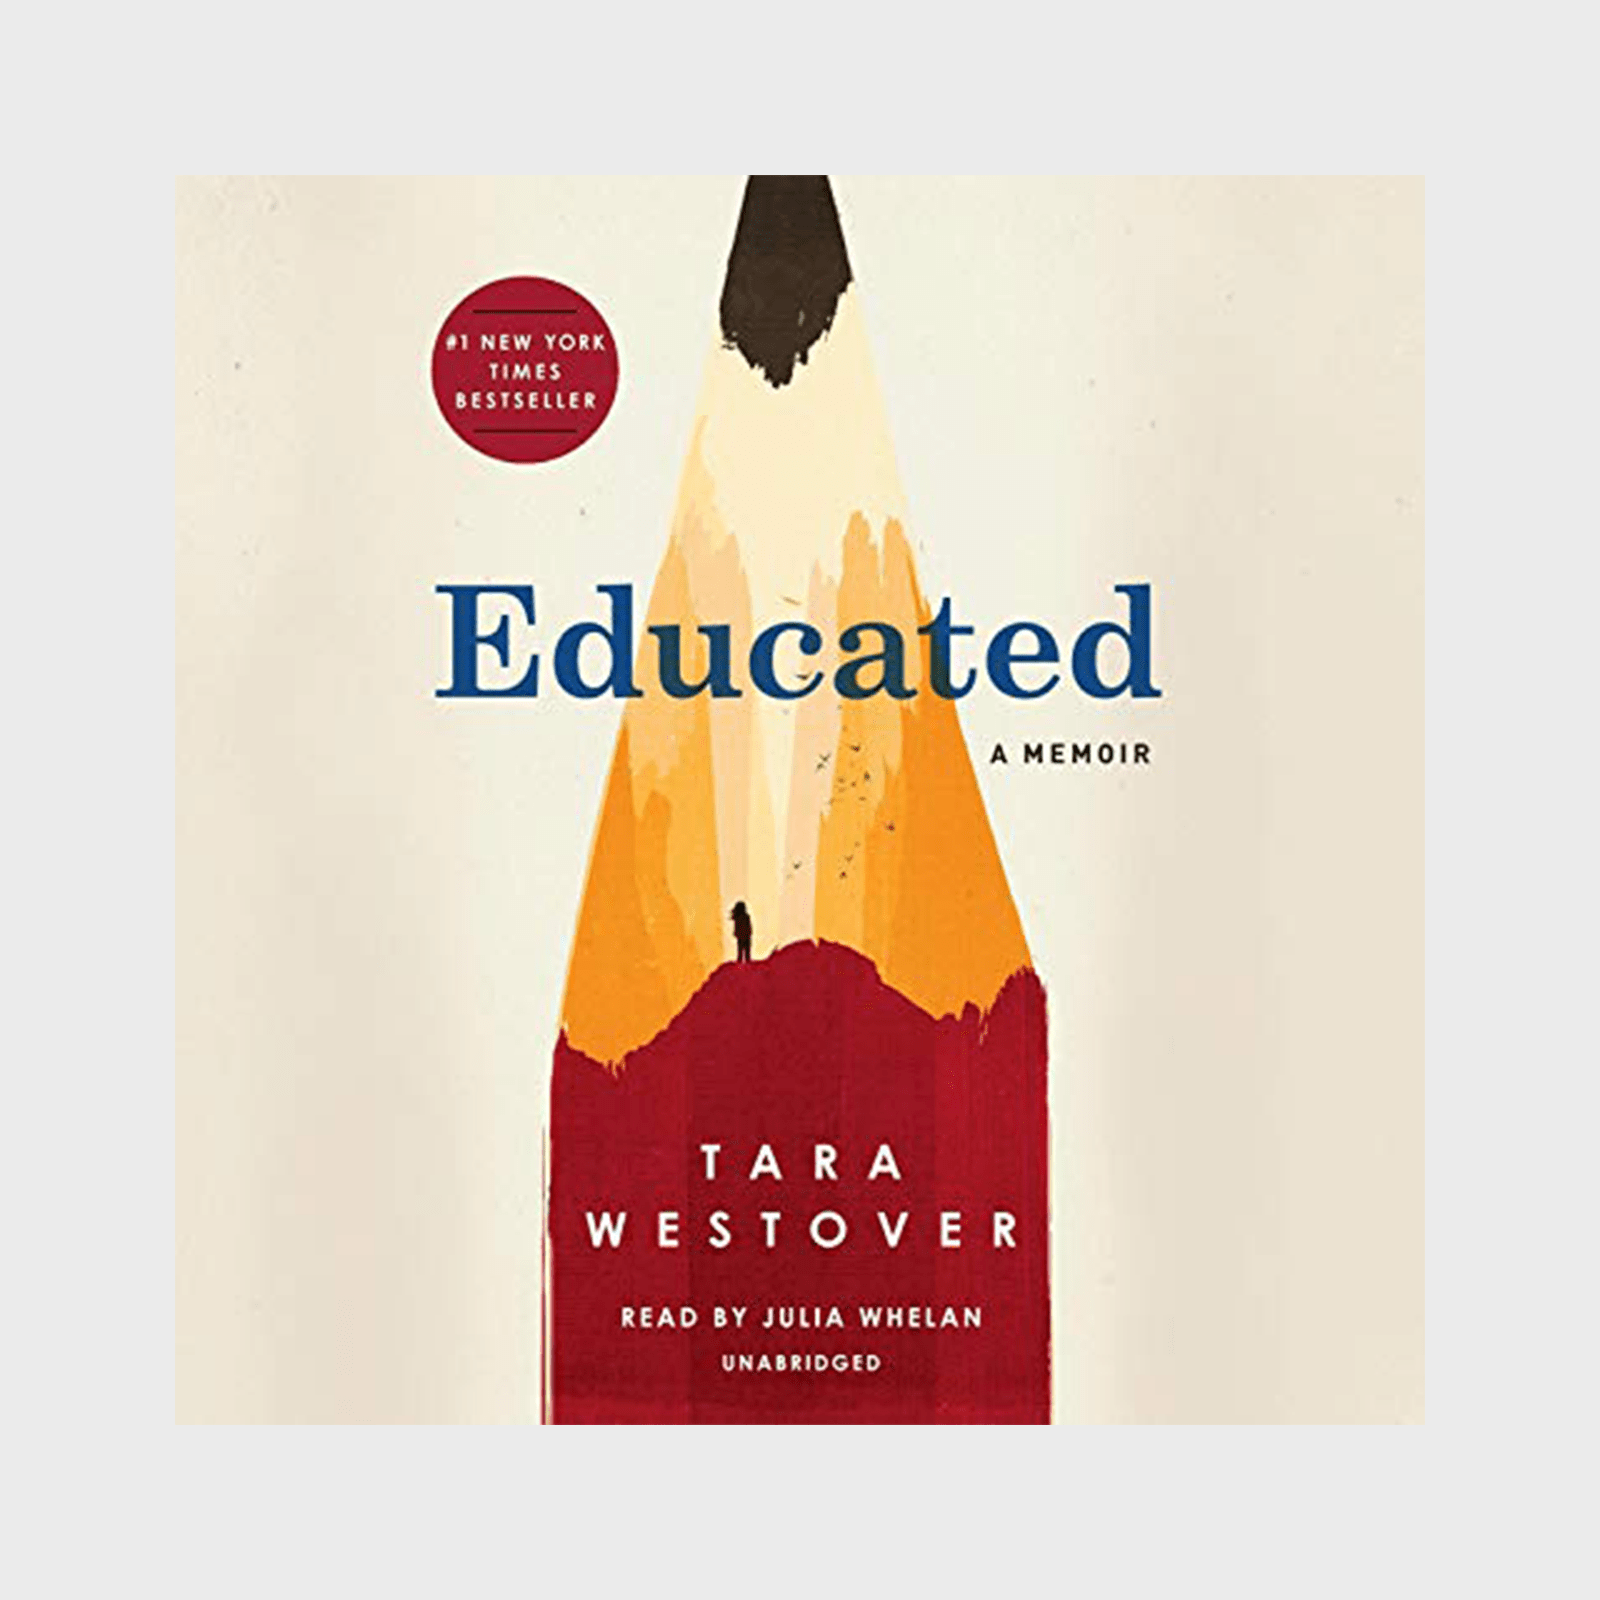 <h3><strong><em>Educated </em>by Tara Westover</strong></h3> <p>Tara Westover's memoir was named one of the best of 2018 by the<em> Washington Post</em>, the New York Public Library, <em>TIME</em> magazine, and countless others. If you haven't read <a href="https://www.amazon.com/Educated-Tara-Westover-audiobook/dp/B075F68BFV" rel="noopener noreferrer"><em>Educated</em></a> yet, now is a great time to listen to actress Julia Whelan recount one of the most moving <a href="https://www.rd.com/list/memoirs-everyone-should-read/" rel="noopener noreferrer">memoirs</a> of overcoming some of life's biggest obstacles, all in the name of getting an education.</p> <p class="listicle-page__cta-button-shop"><a class="shop-btn" href="https://www.amazon.com/Educated-Tara-Westover-audiobook/dp/B075F68BFV">Shop Now</a></p>